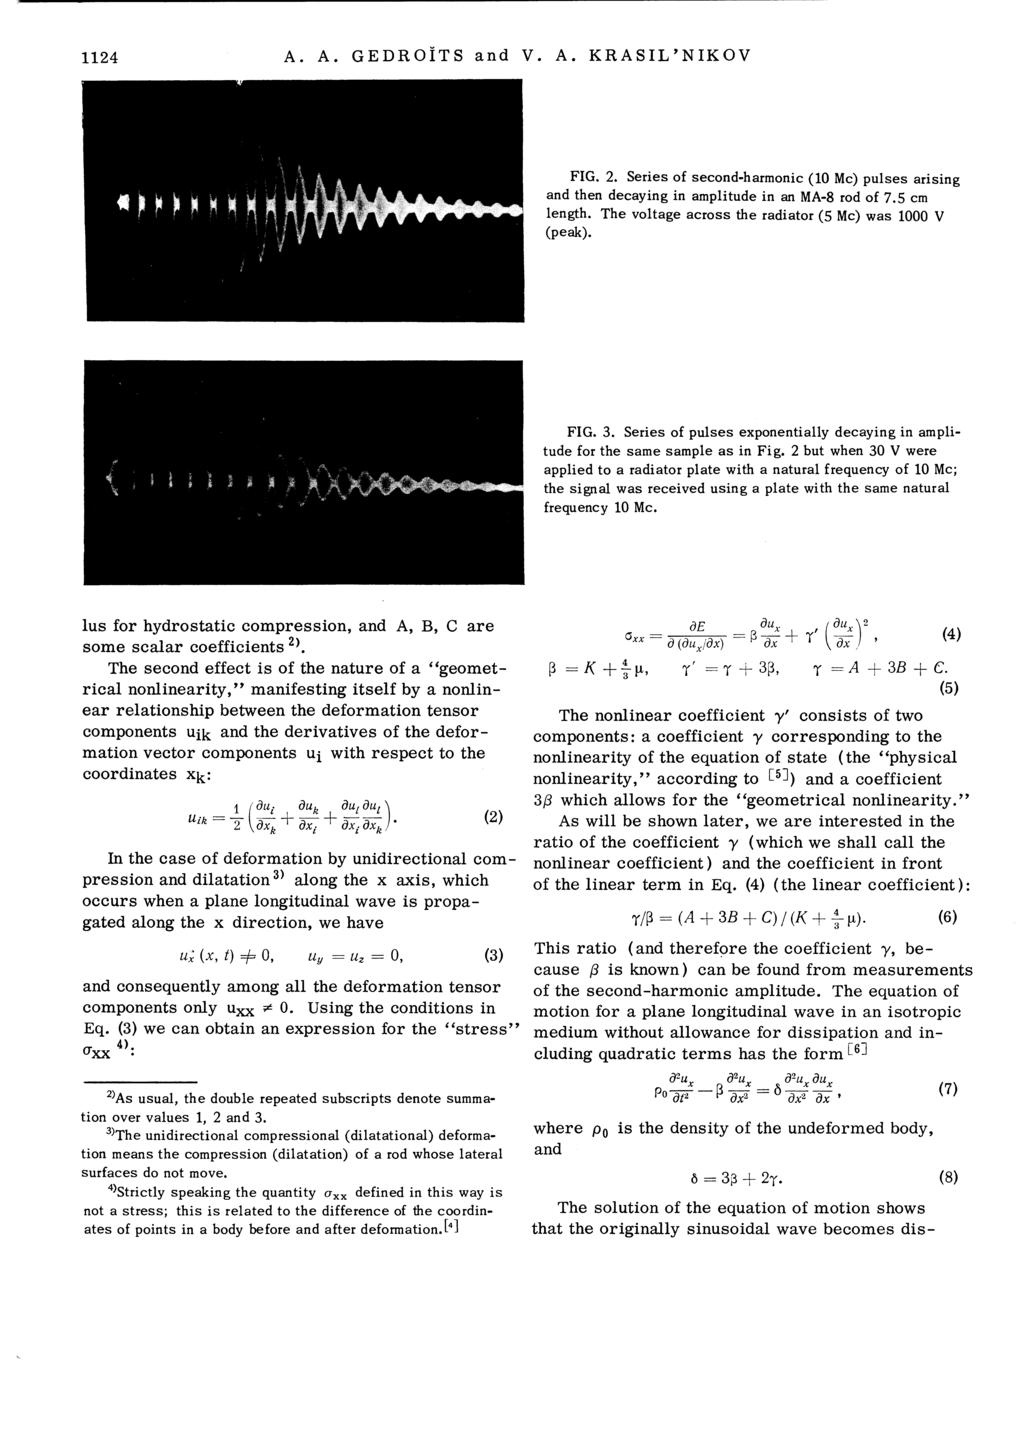 1124 A. A. GEDROfTS and V. A. KRASIL'NIKOV FIG. 2. Series of second-harmonic (10 Me) pulses arising and then decaying in amplitude in an MA-8 rod of 7.5 em length.